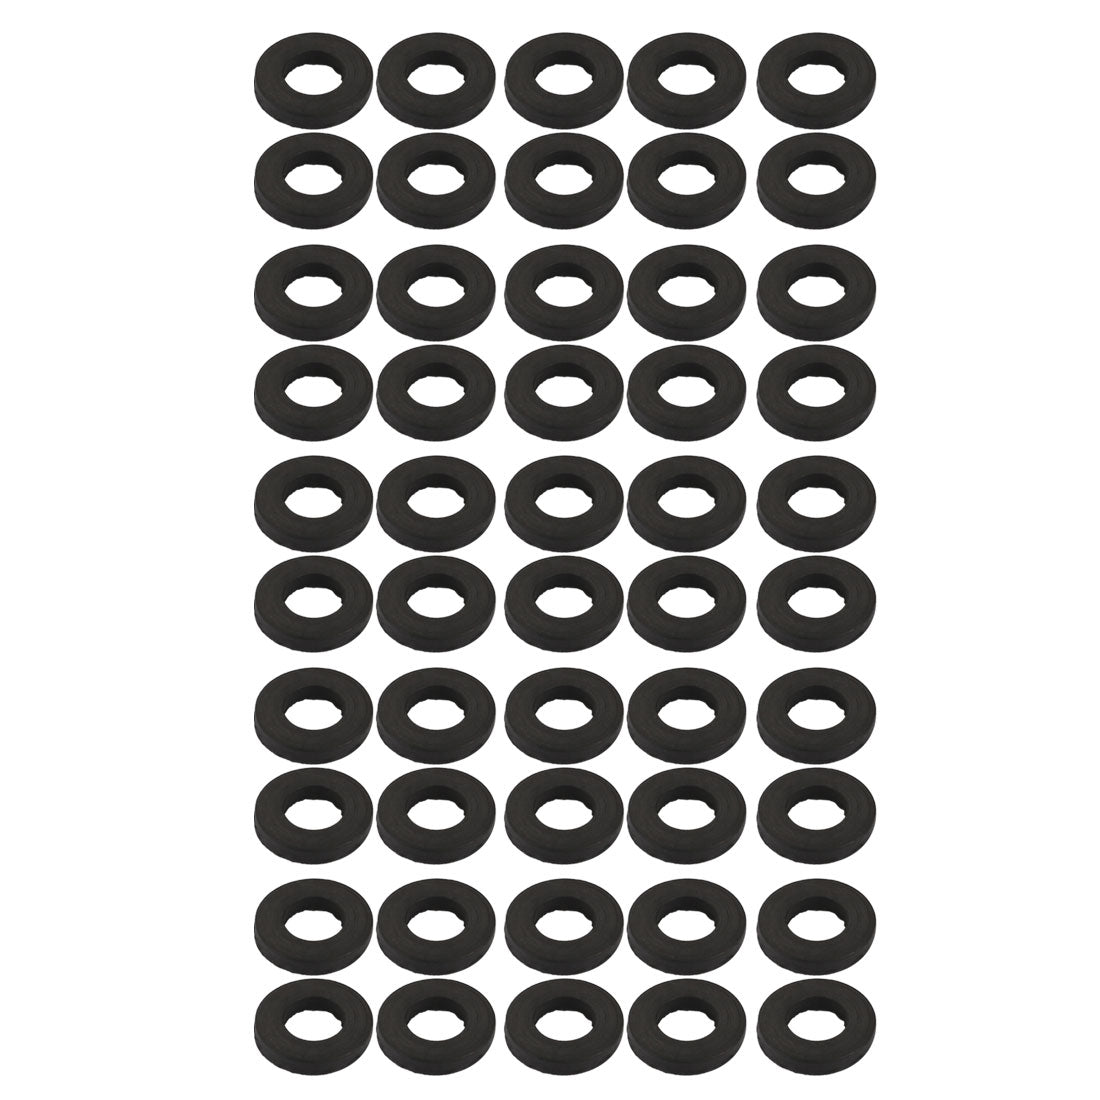 Uxcell Uxcell 50pcs Black Rubber Round Flat Washer Assortment Size 8x21x2mm Flat Washer